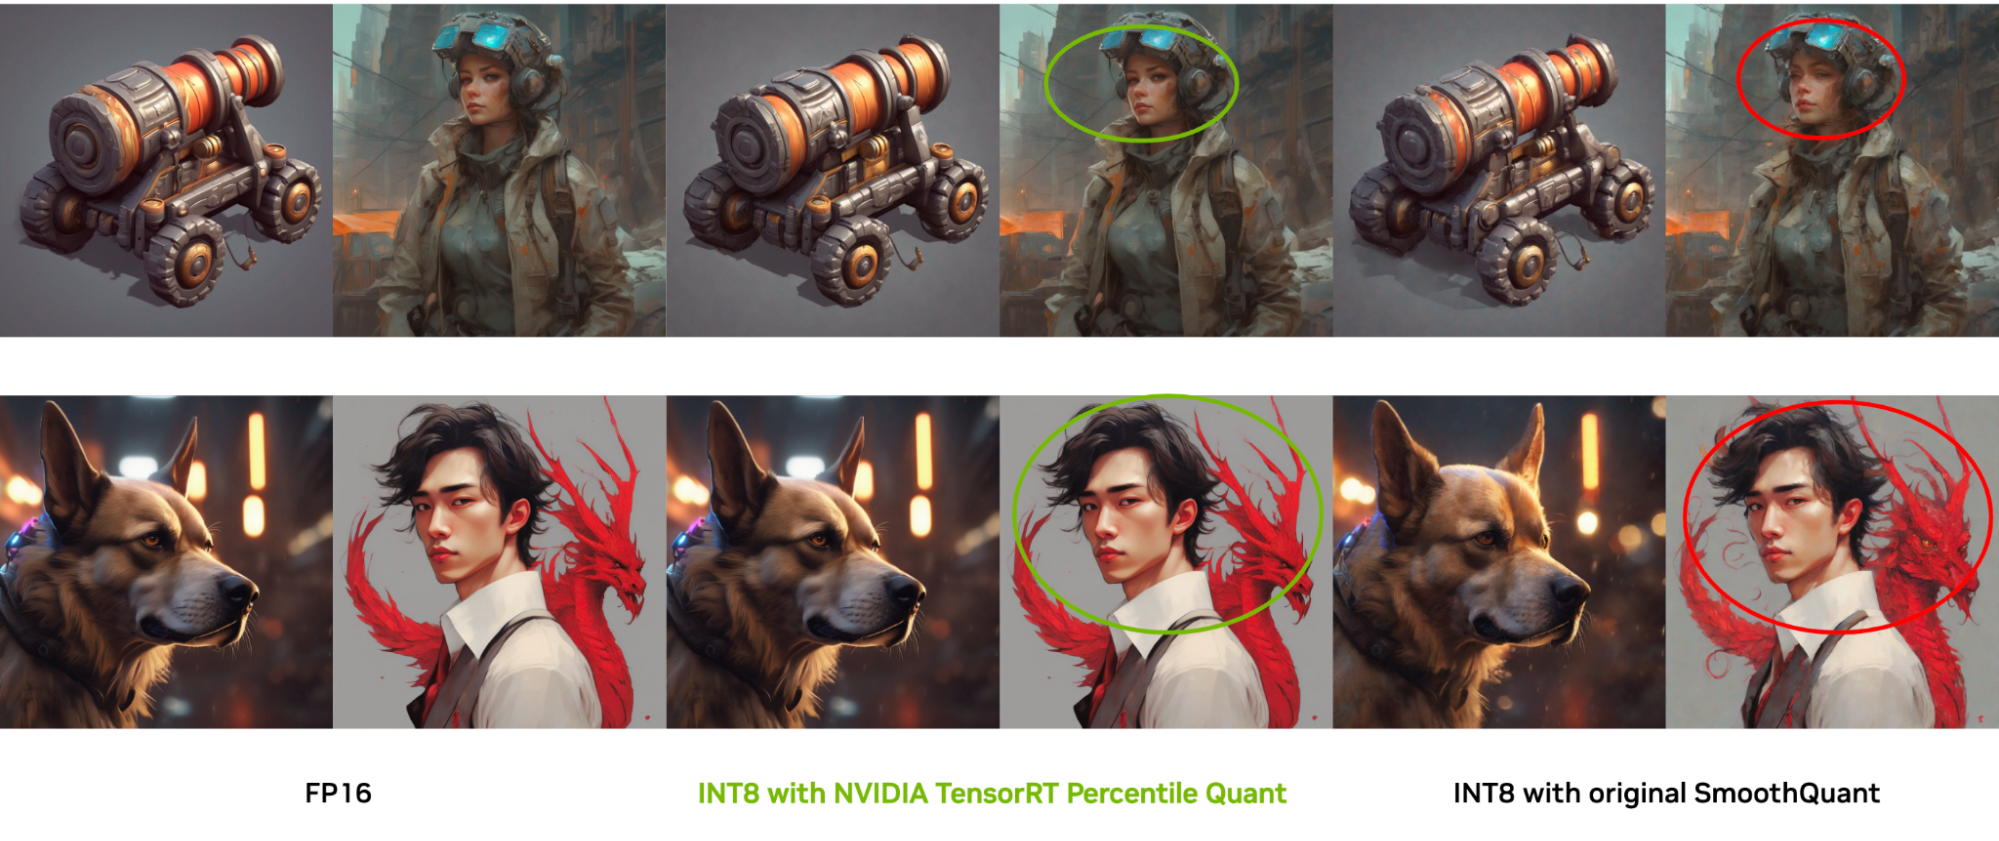 Four output images (dog, man with red dragon, toy cannon, and woman with goggles) compare FP16 with INT8 with NVIDIA TensorRT Percentile Quant and INT8 with original SmoothQuant.